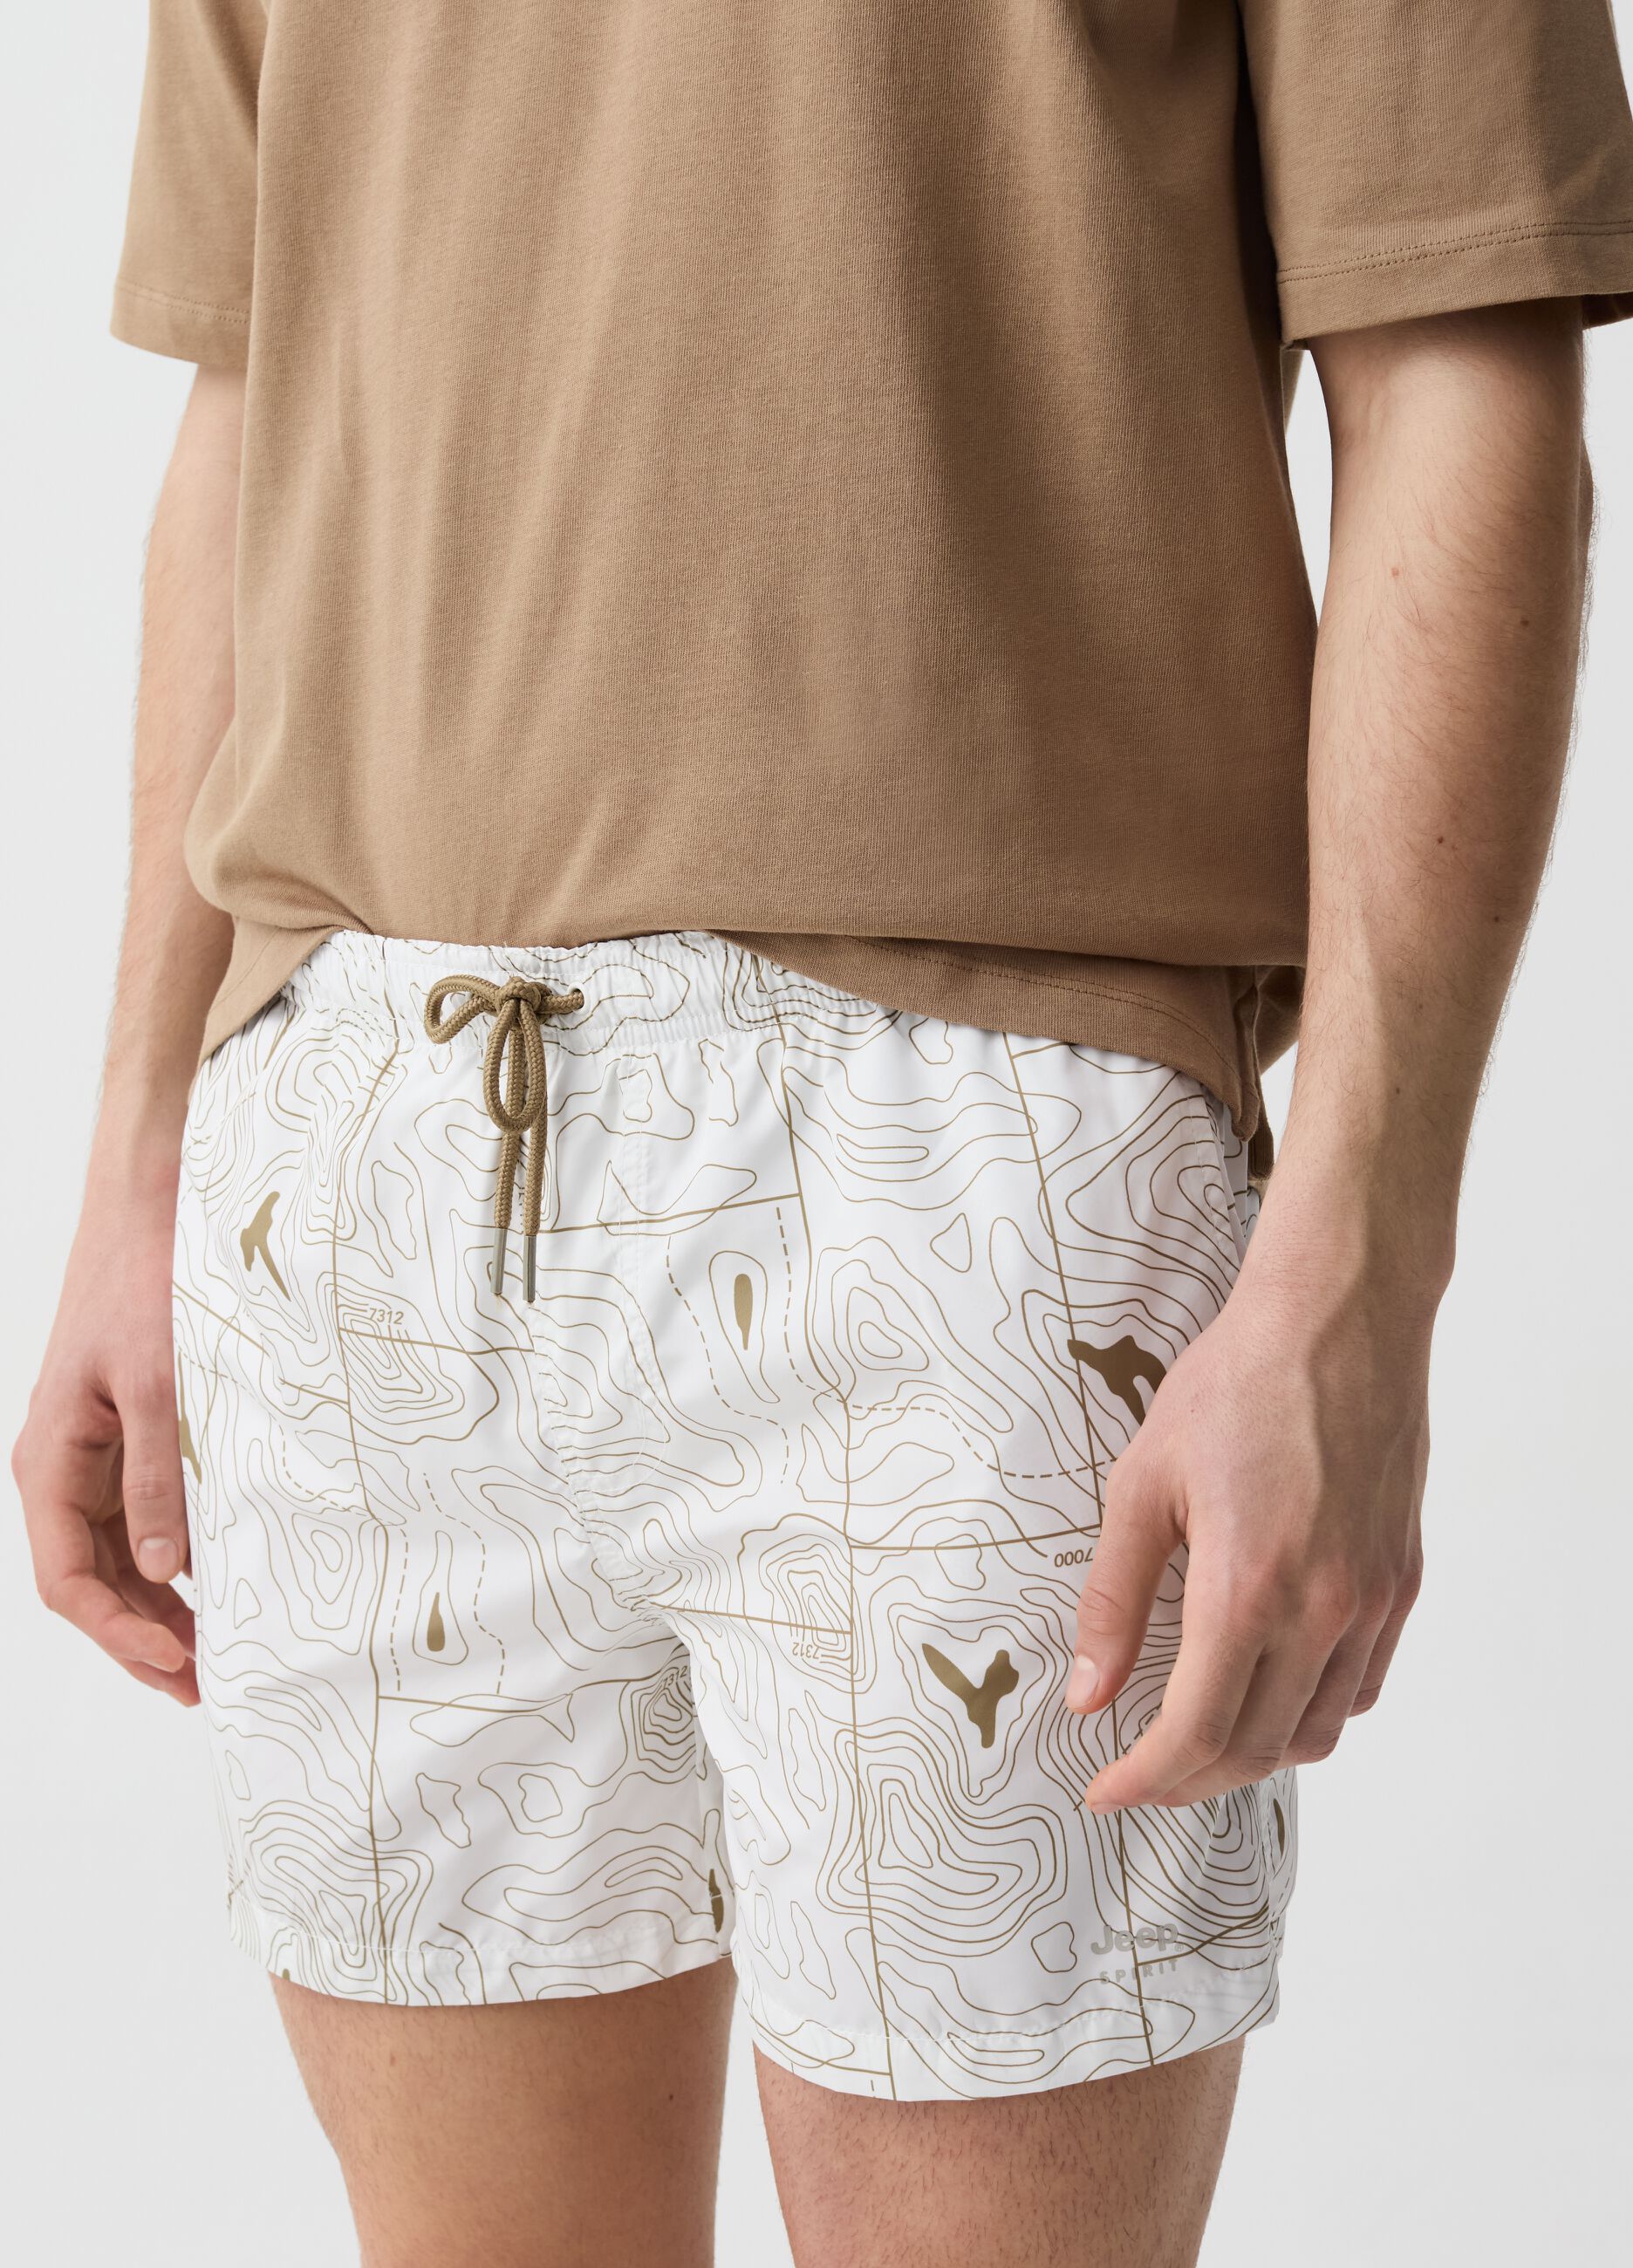 Cotton swimming shorts with patterned drawstring